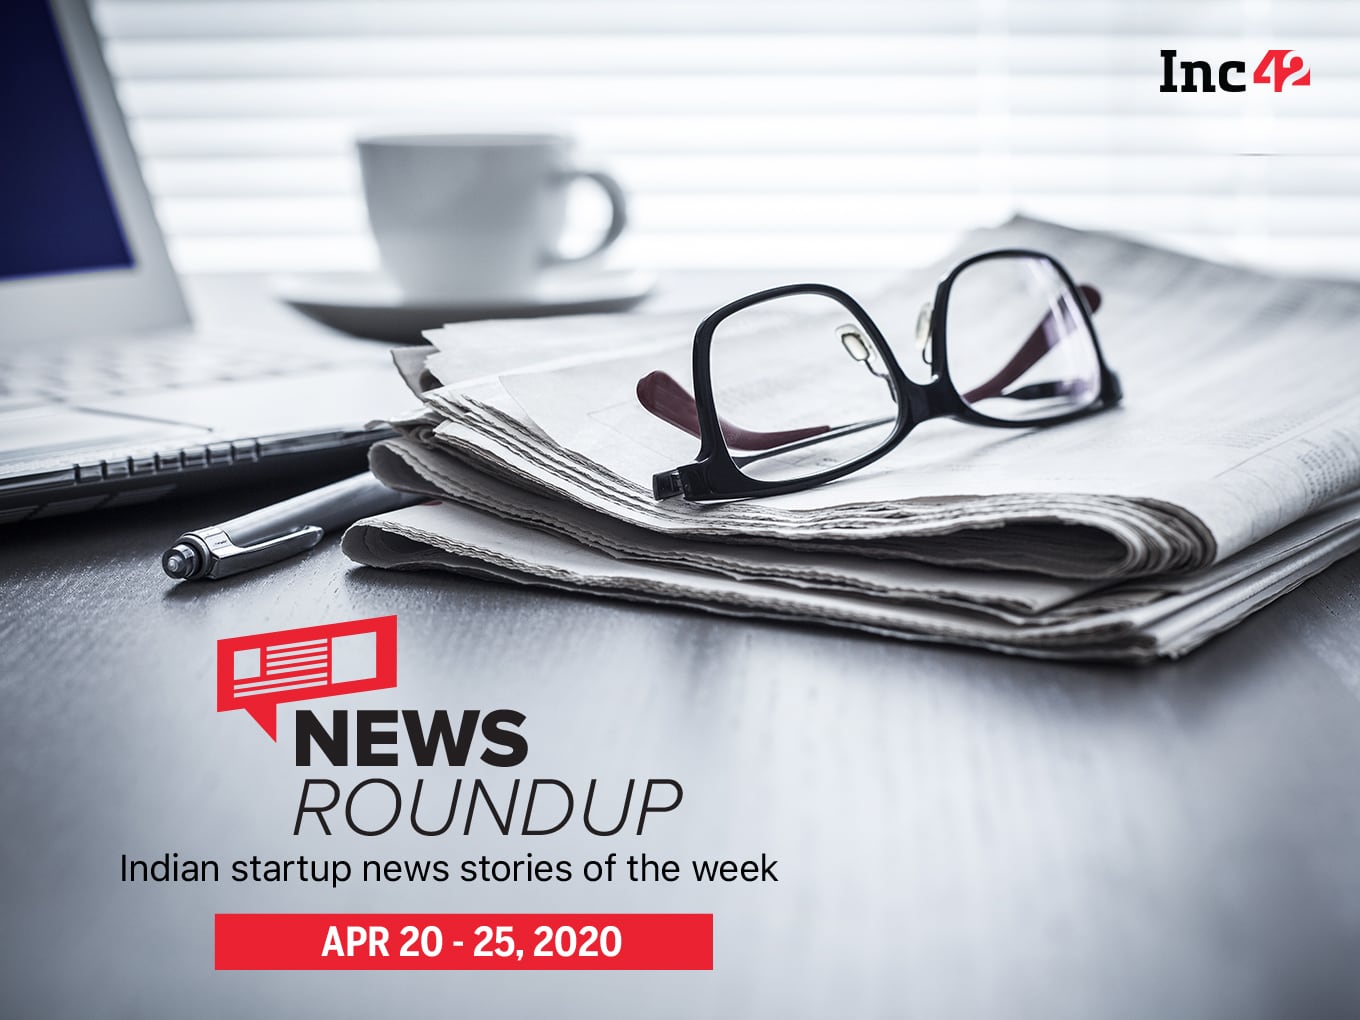 News Roundup: 11 Indian Startup News Stories You Don’t Want To Miss This Week [April 20 - 25]